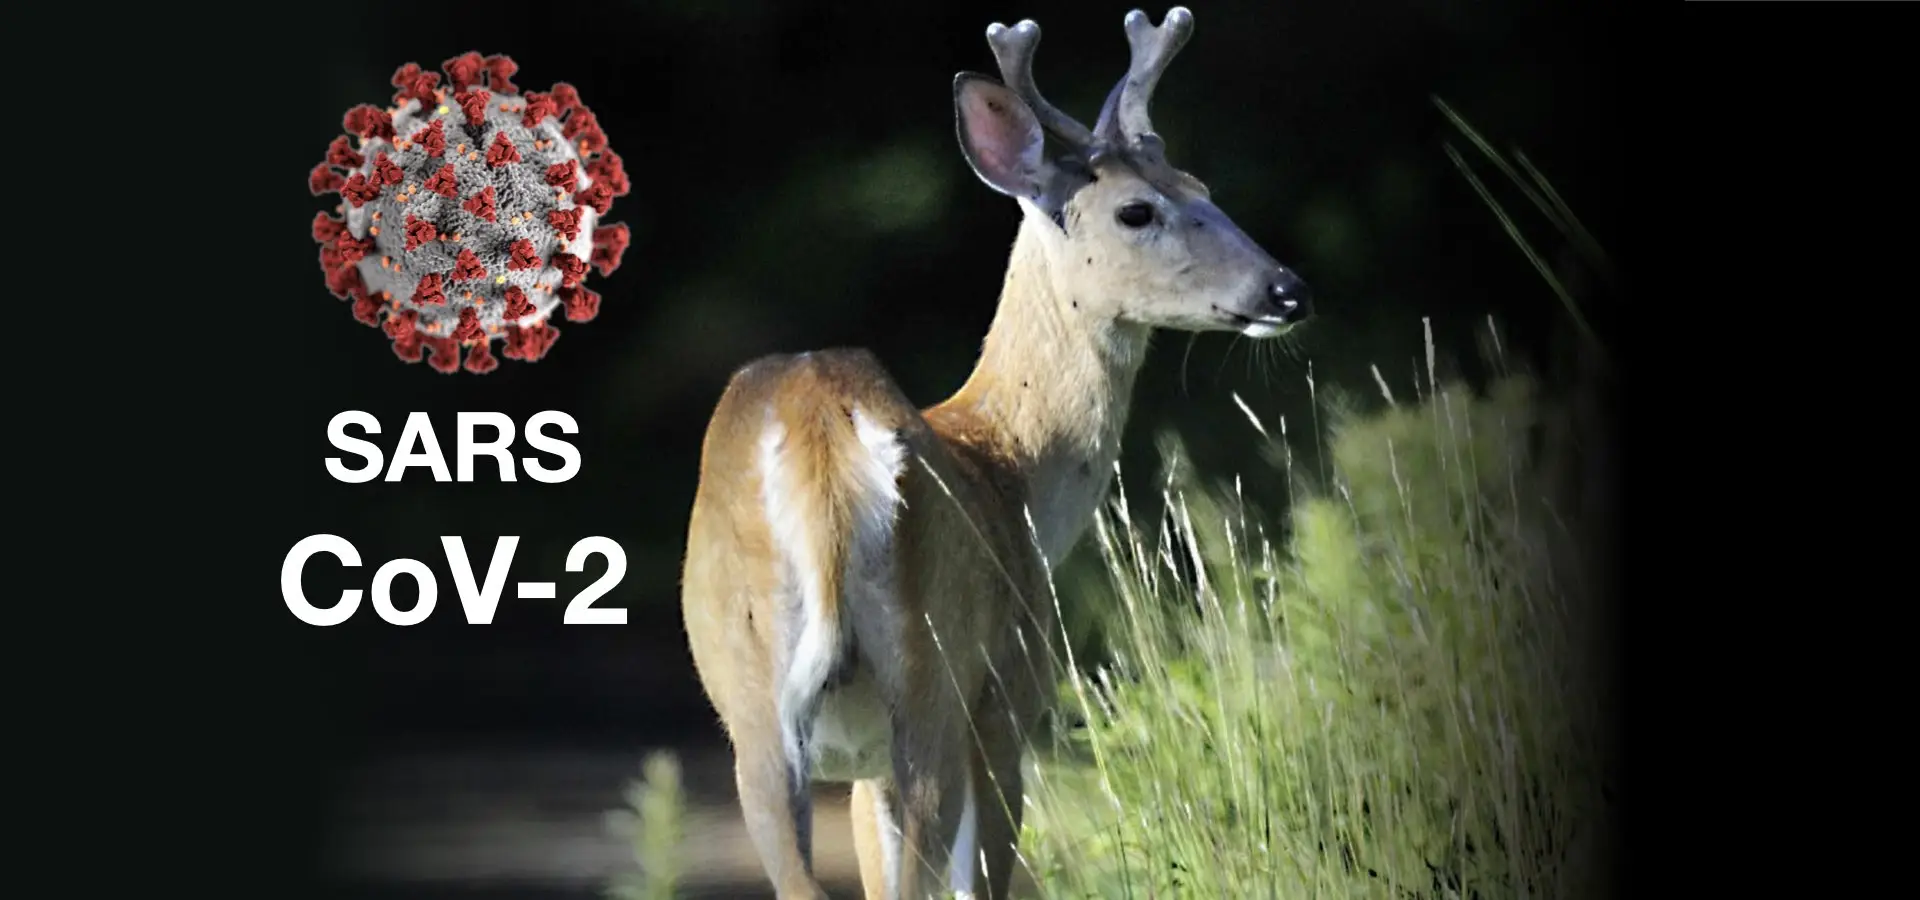 ‎Bidirectional-Transmission-of-Mutated-SARS-CoV-2-Between-Humans-and-White-Tailed-Deer-Raises-Concerns.‎001